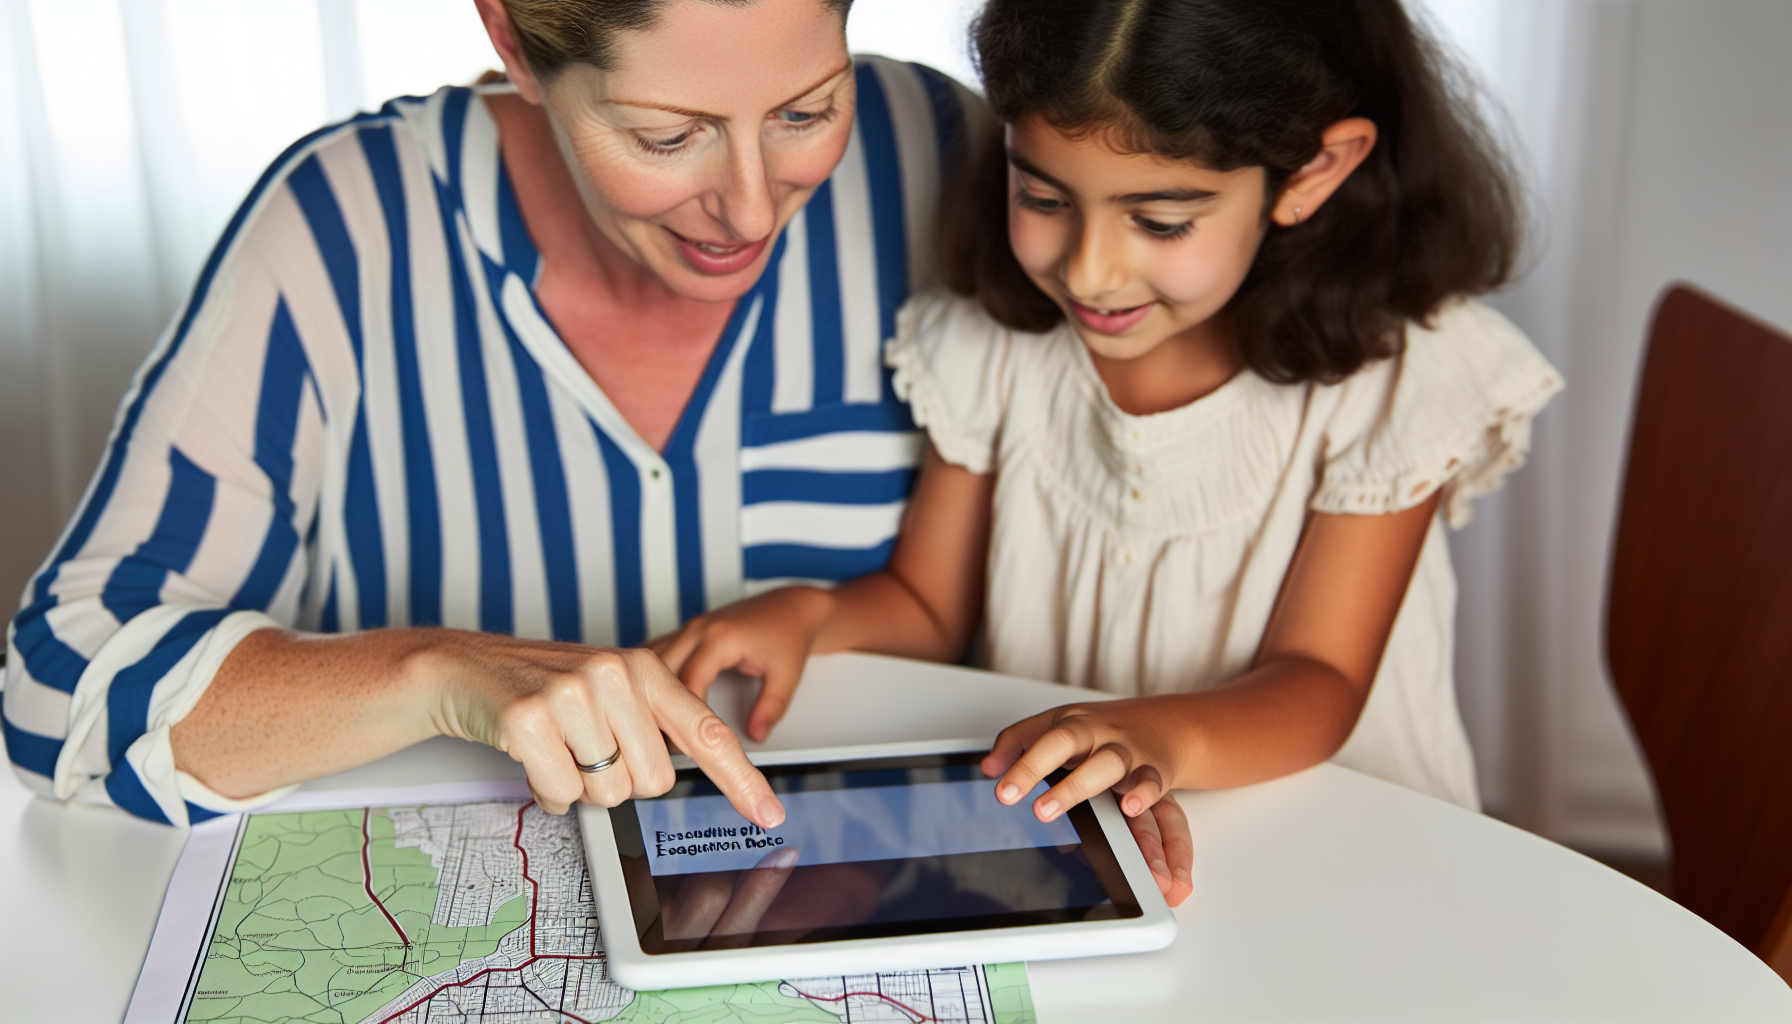 A mother and daughter look at a map and plan an evacuation route using a tablet device with a keyboard